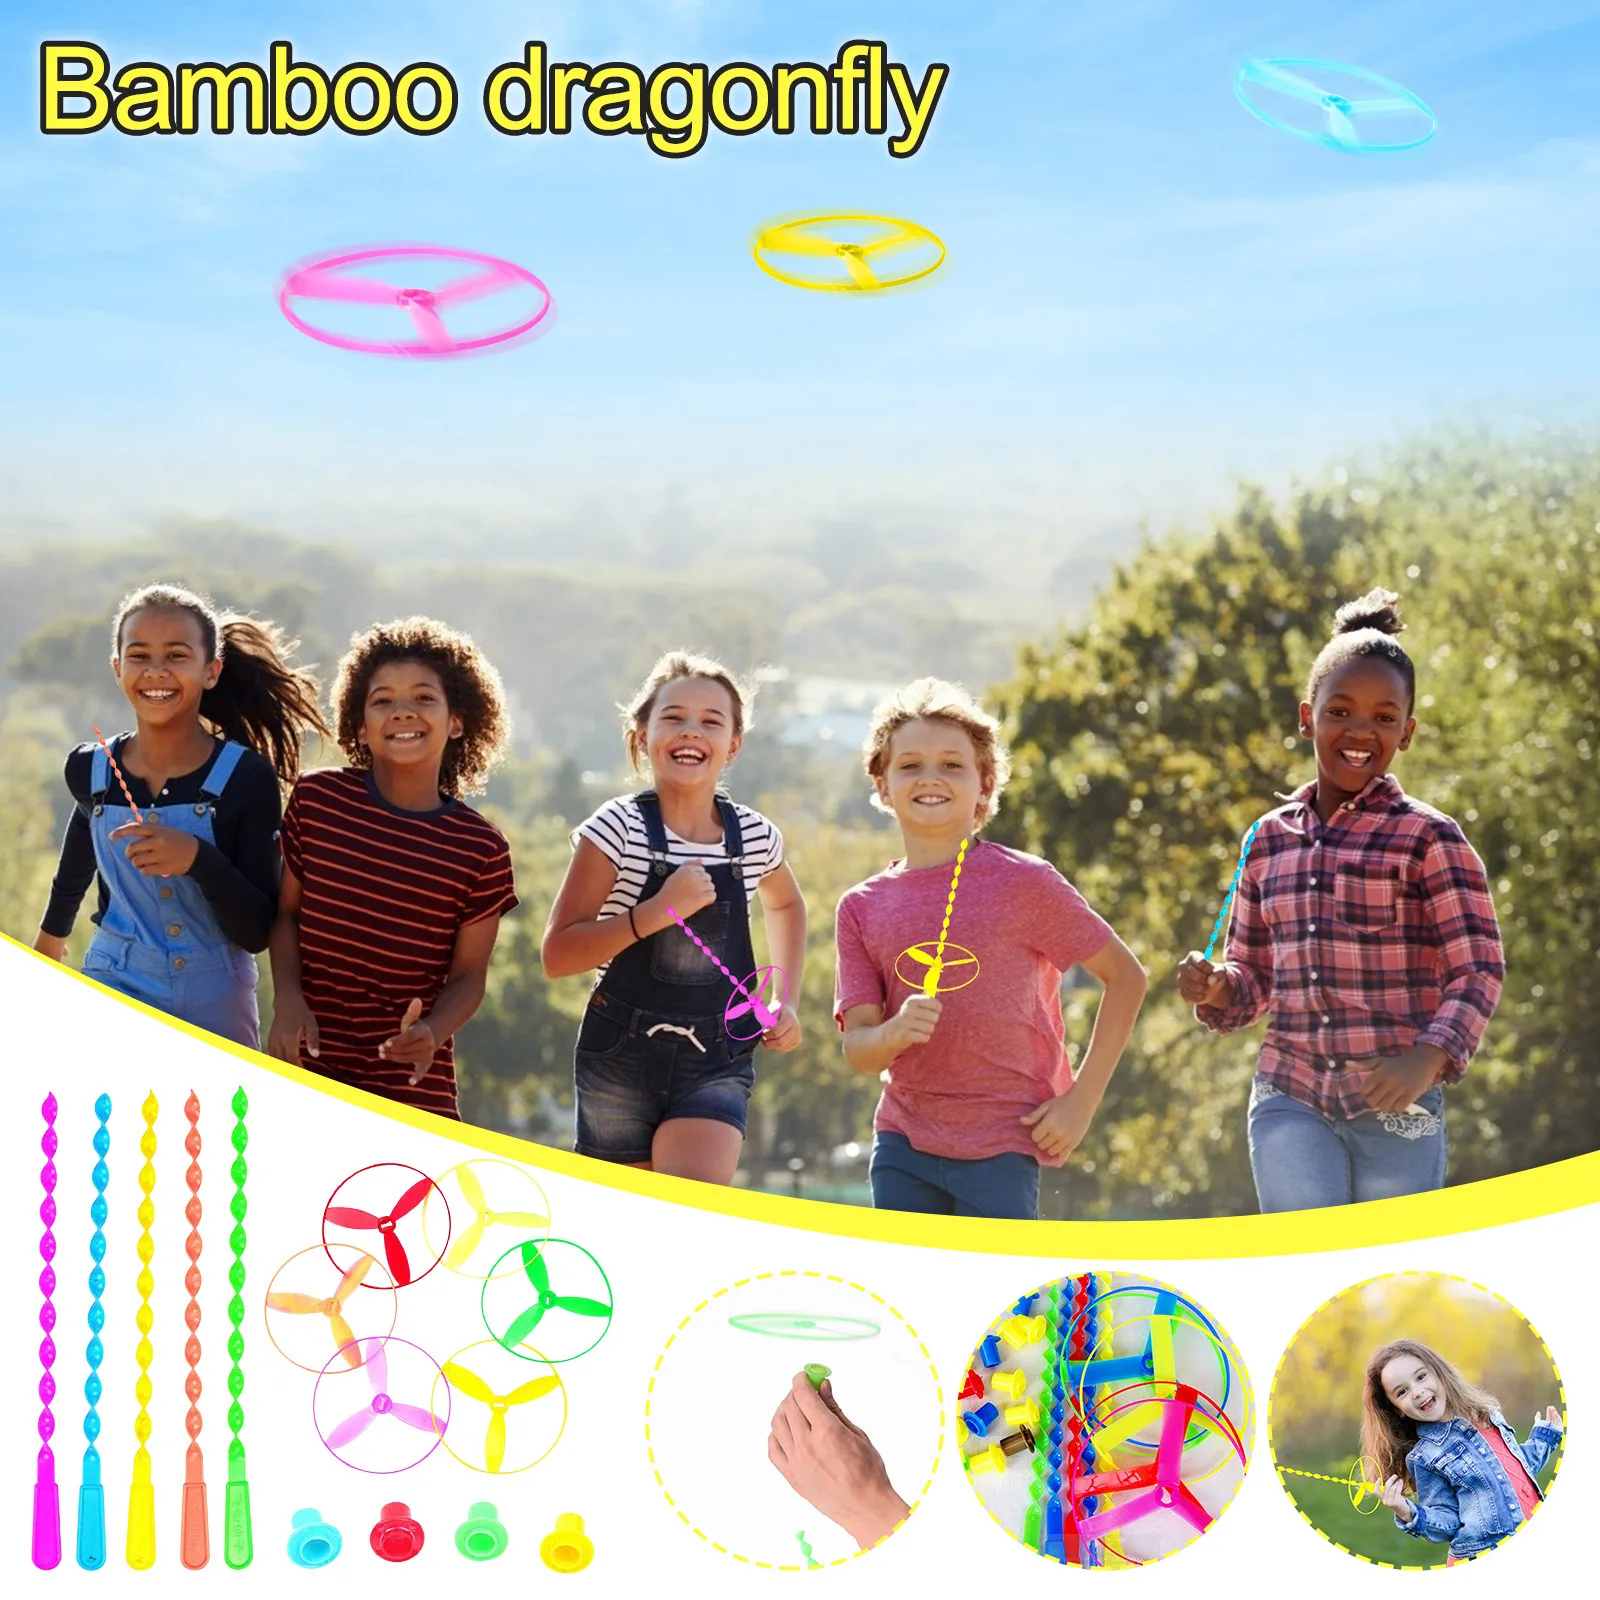 

Novelty Children Bamboo Toys Spinning Flywheel Flying Saucer Toys Classic Plastic Bamboo Dragonfly Propeller Sport Kids Outdoor